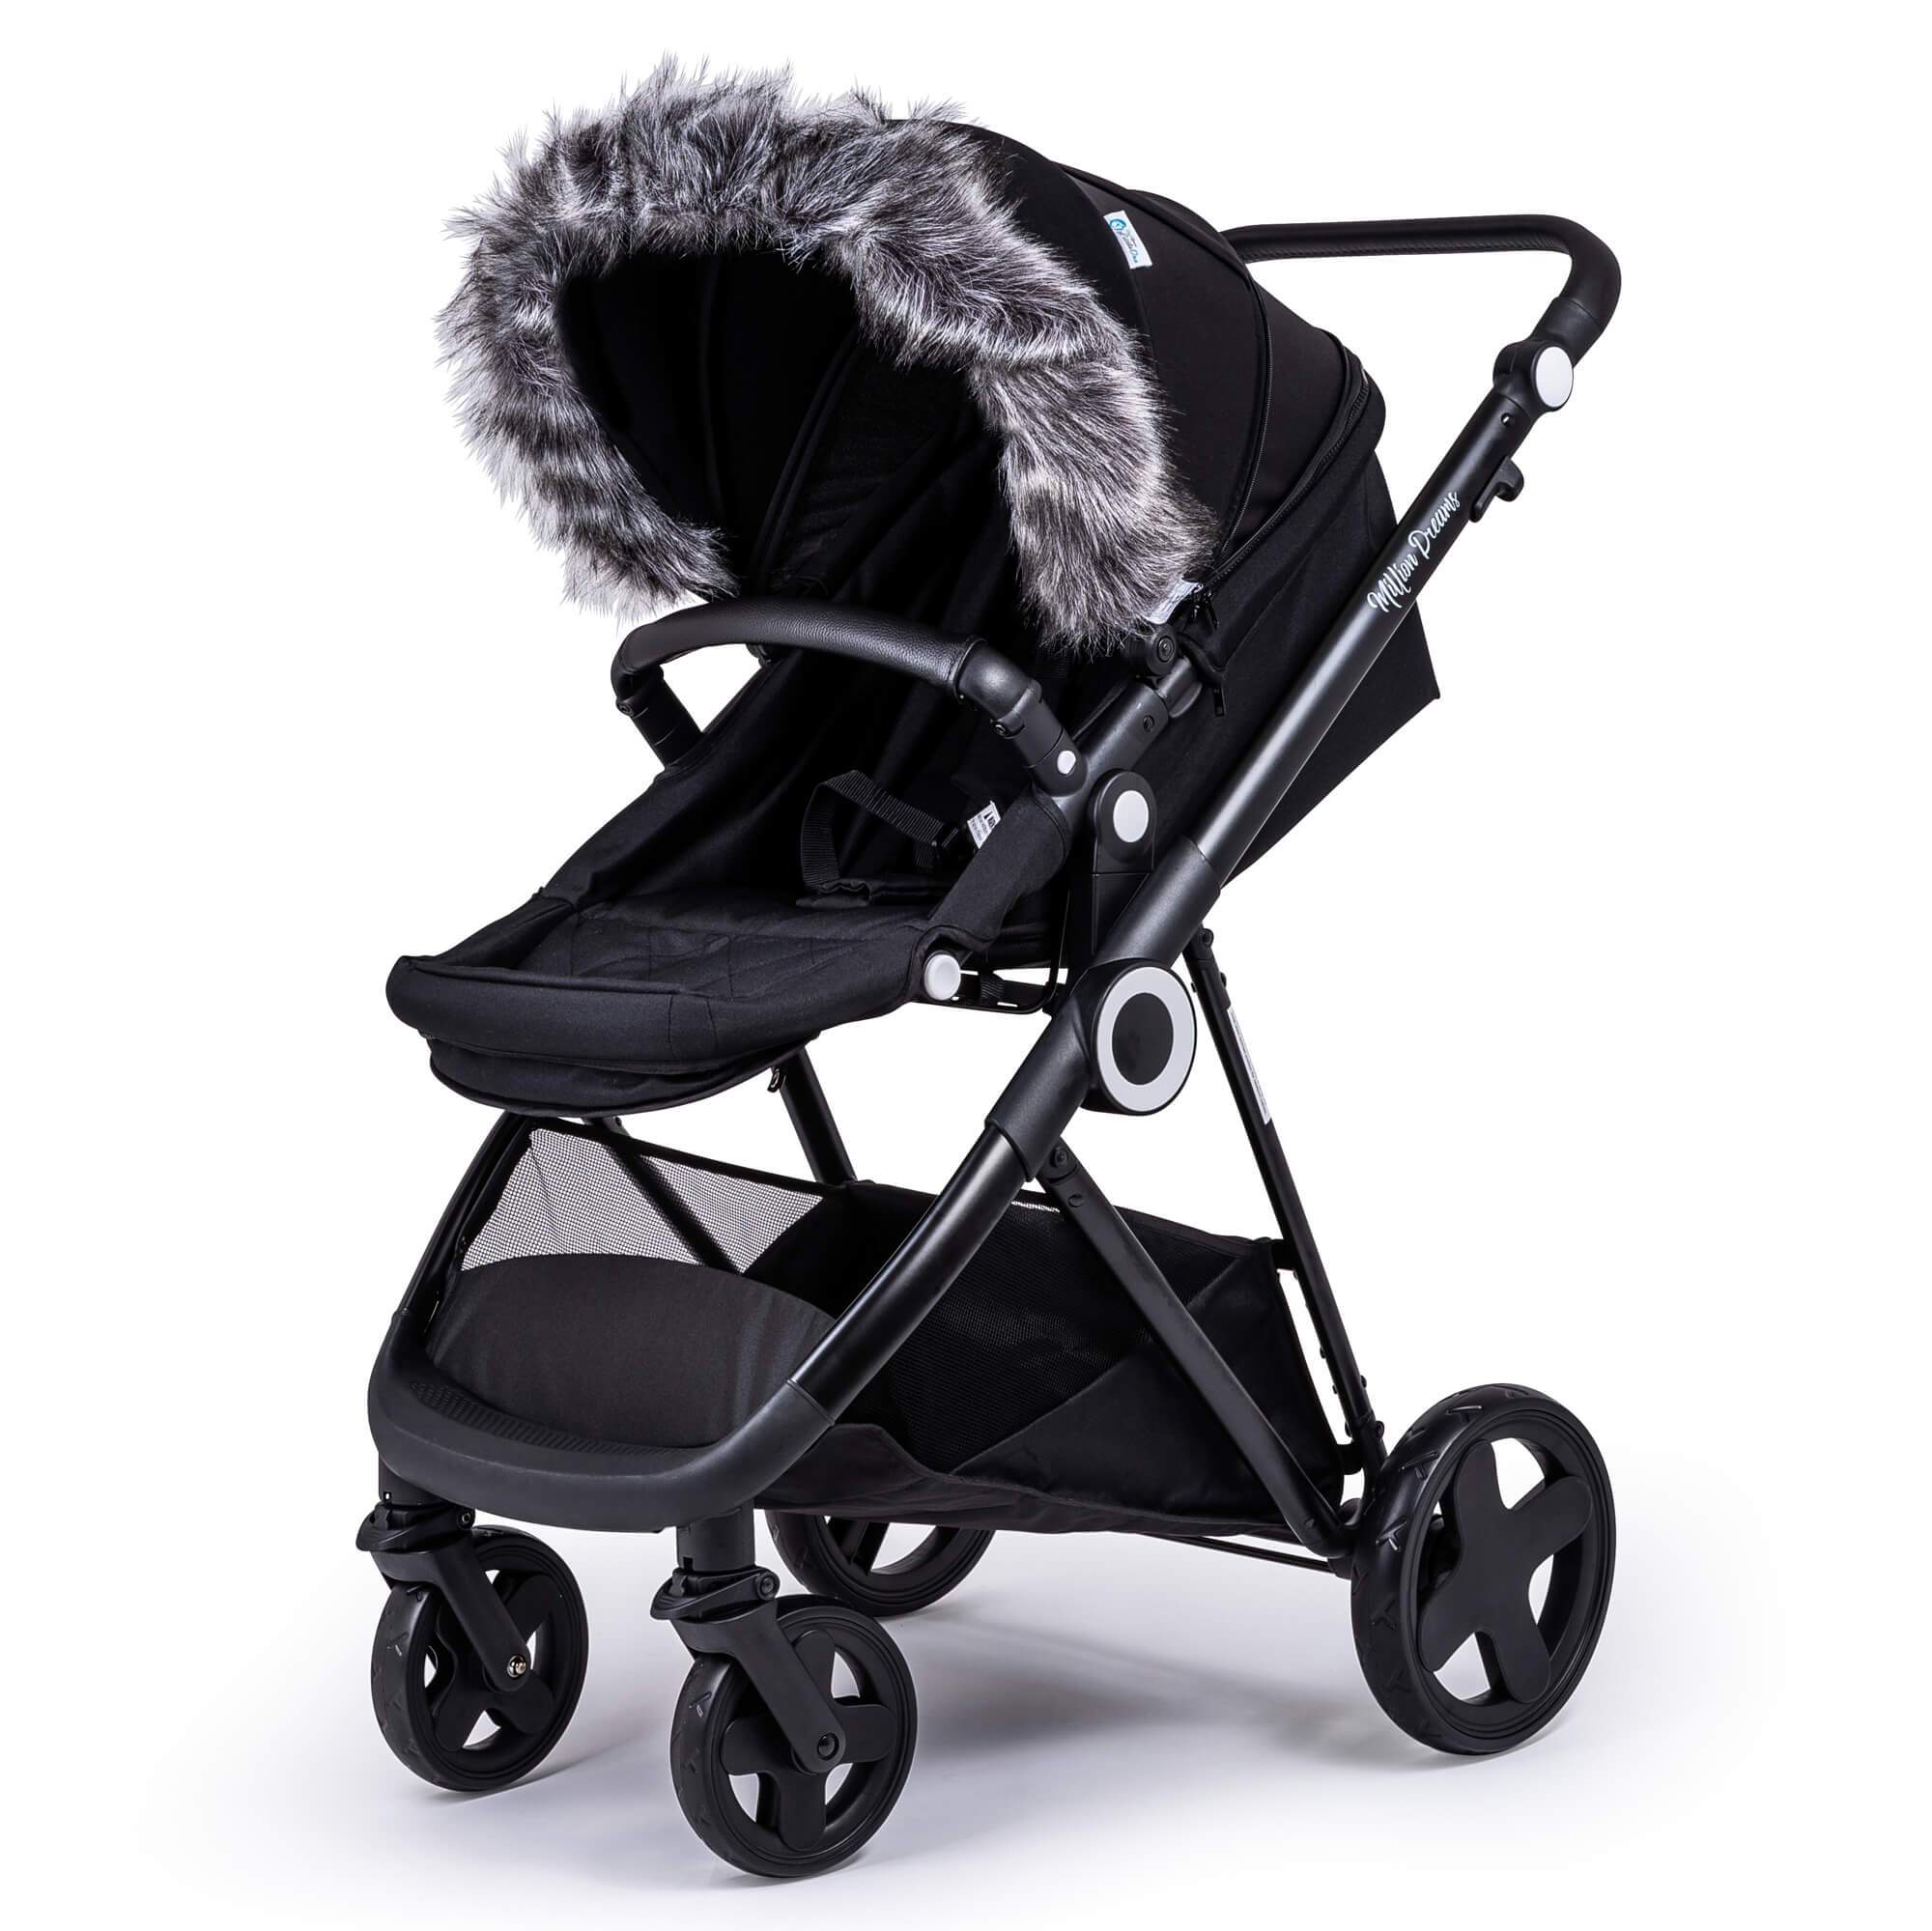 Pram Fur Hood Trim Attachment for Pushchair Compatible with Jane - For Your Little One